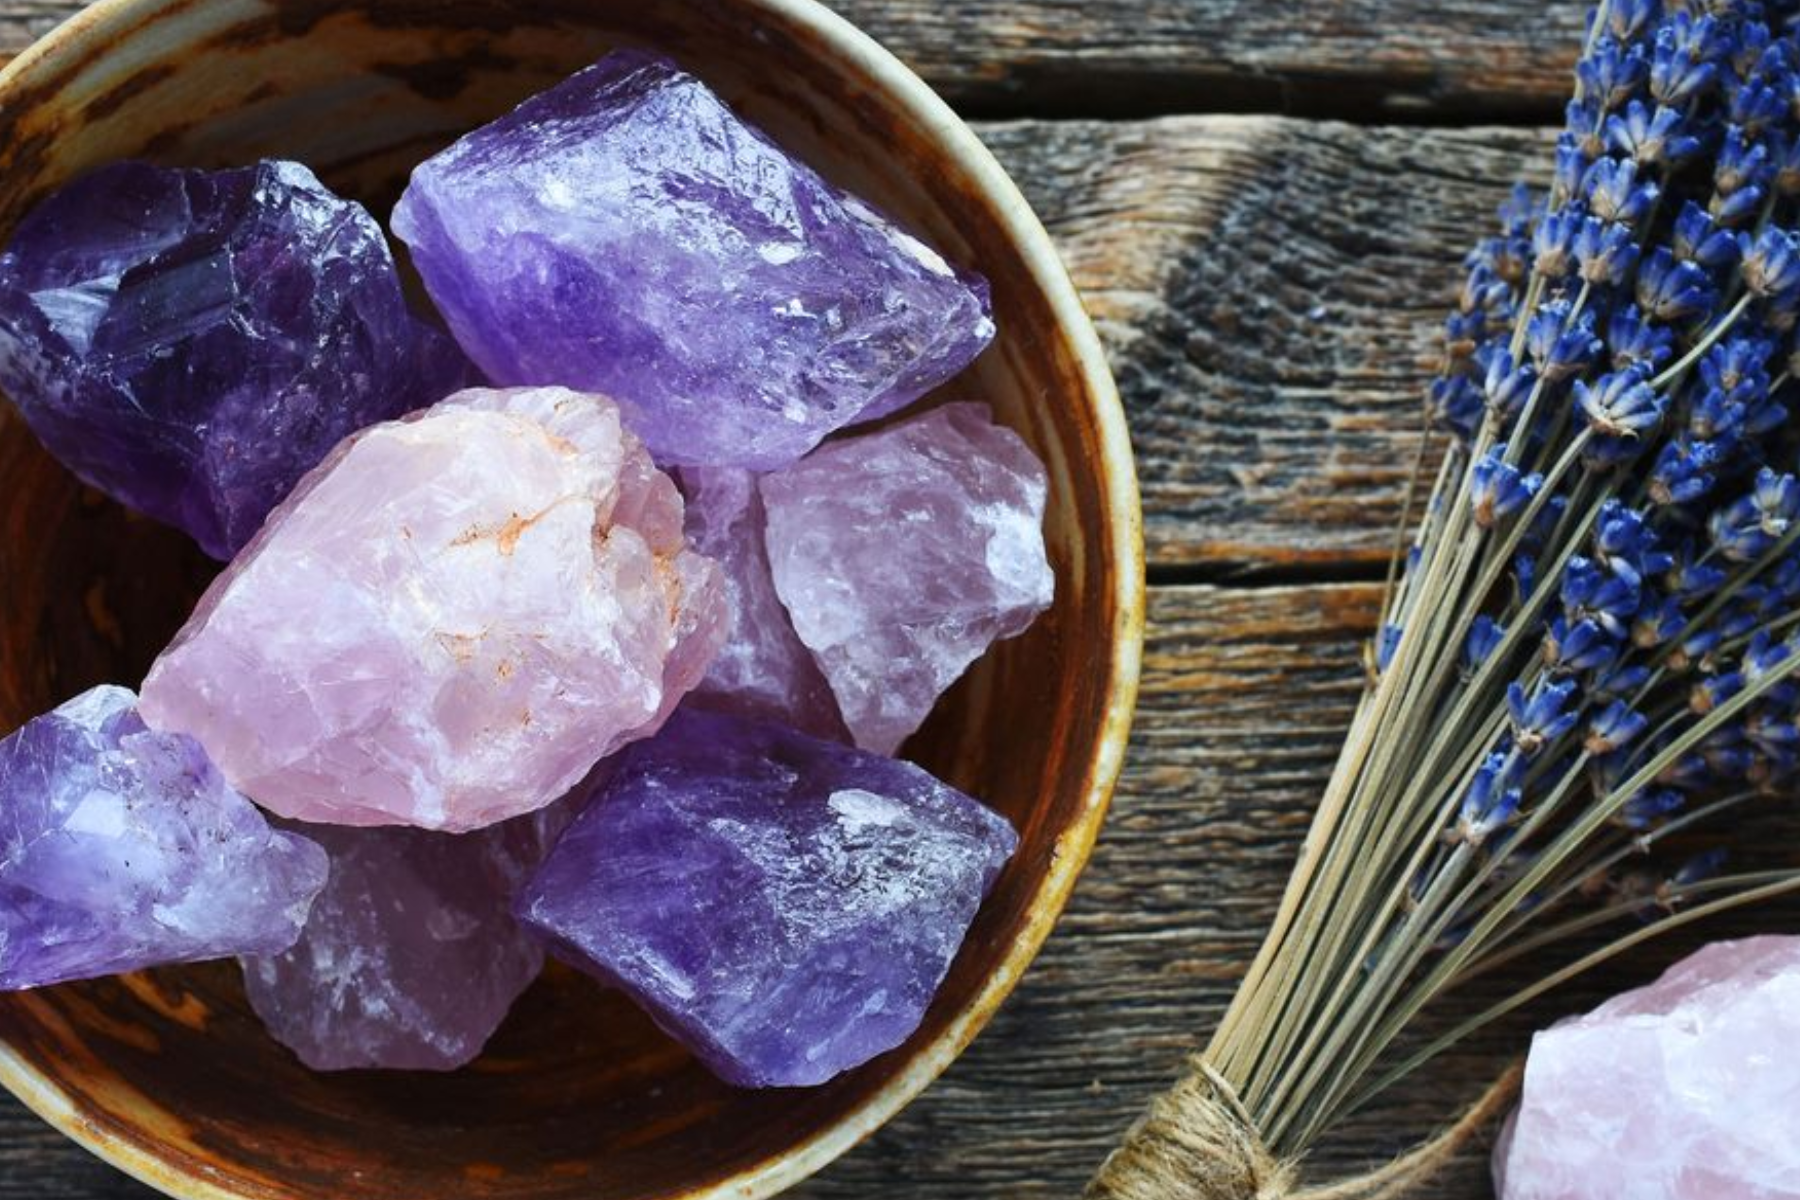 Blue flowers and amethyst crystals in a bowl